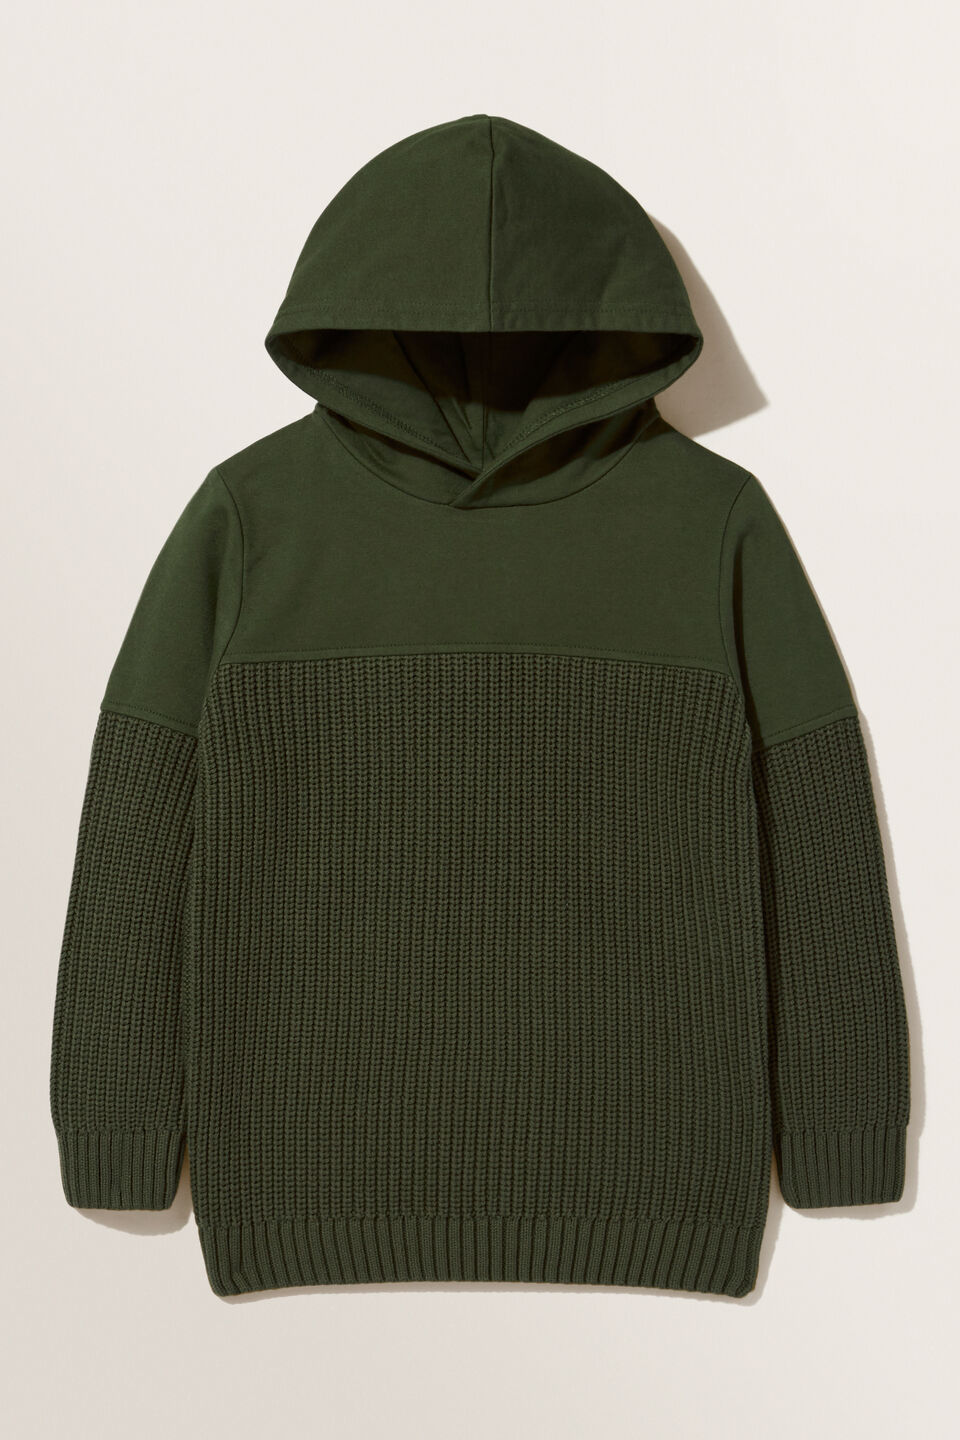 Spliced Knitted Hoodie  Forest  hi-res